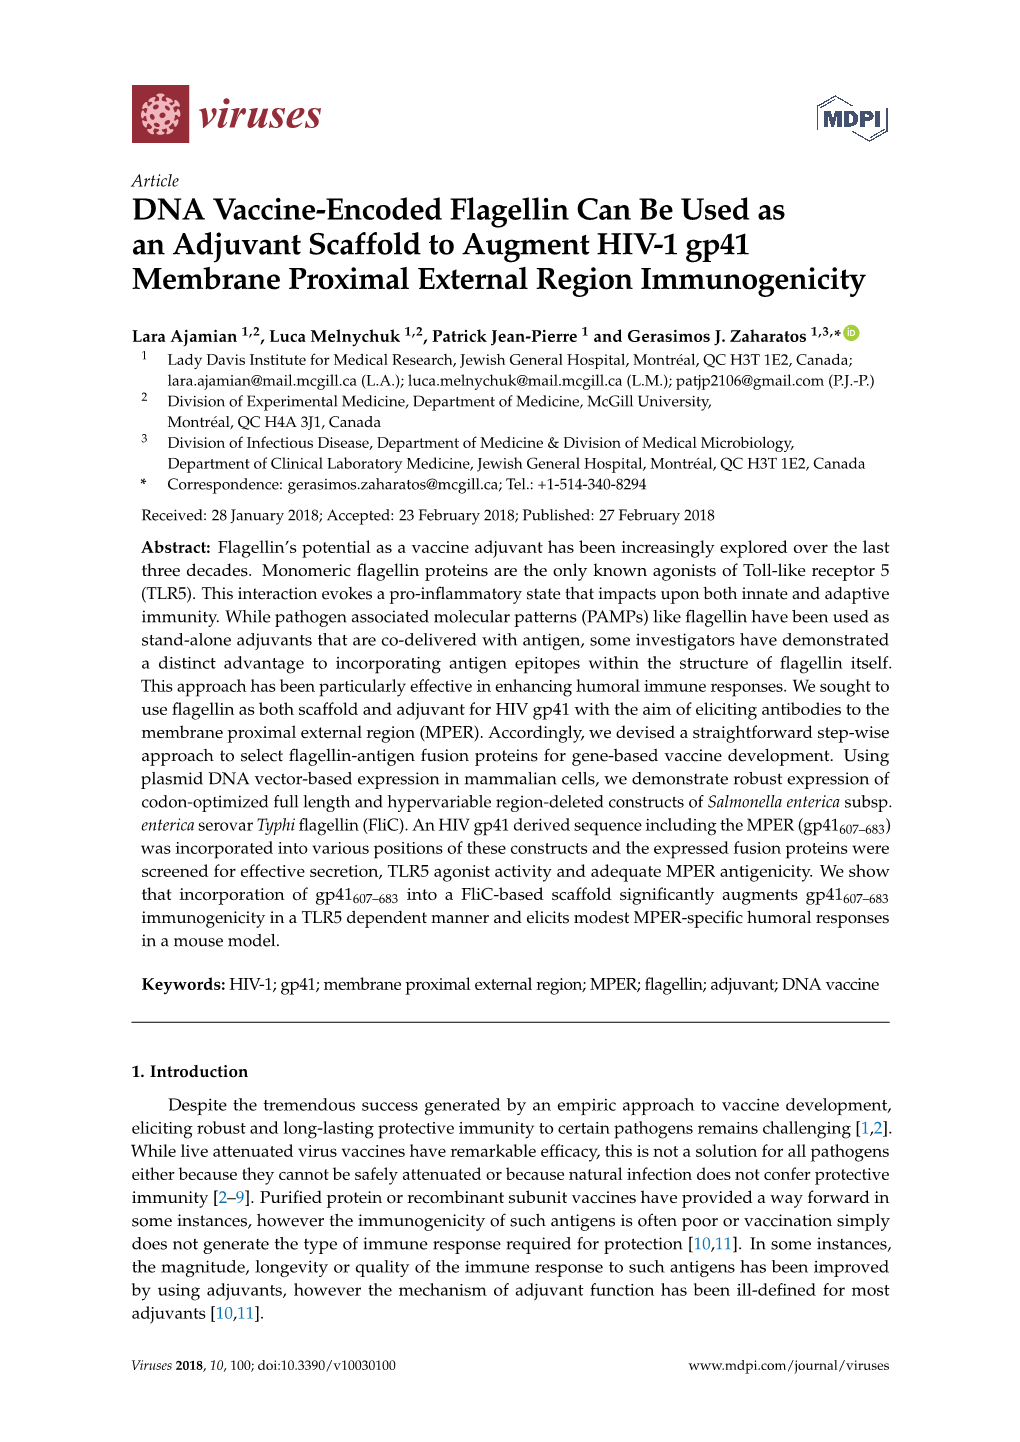 DNA Vaccine-Encoded Flagellin Can Be Used As an Adjuvant Scaffold to Augment HIV-1 Gp41 Membrane Proximal External Region Immunogenicity